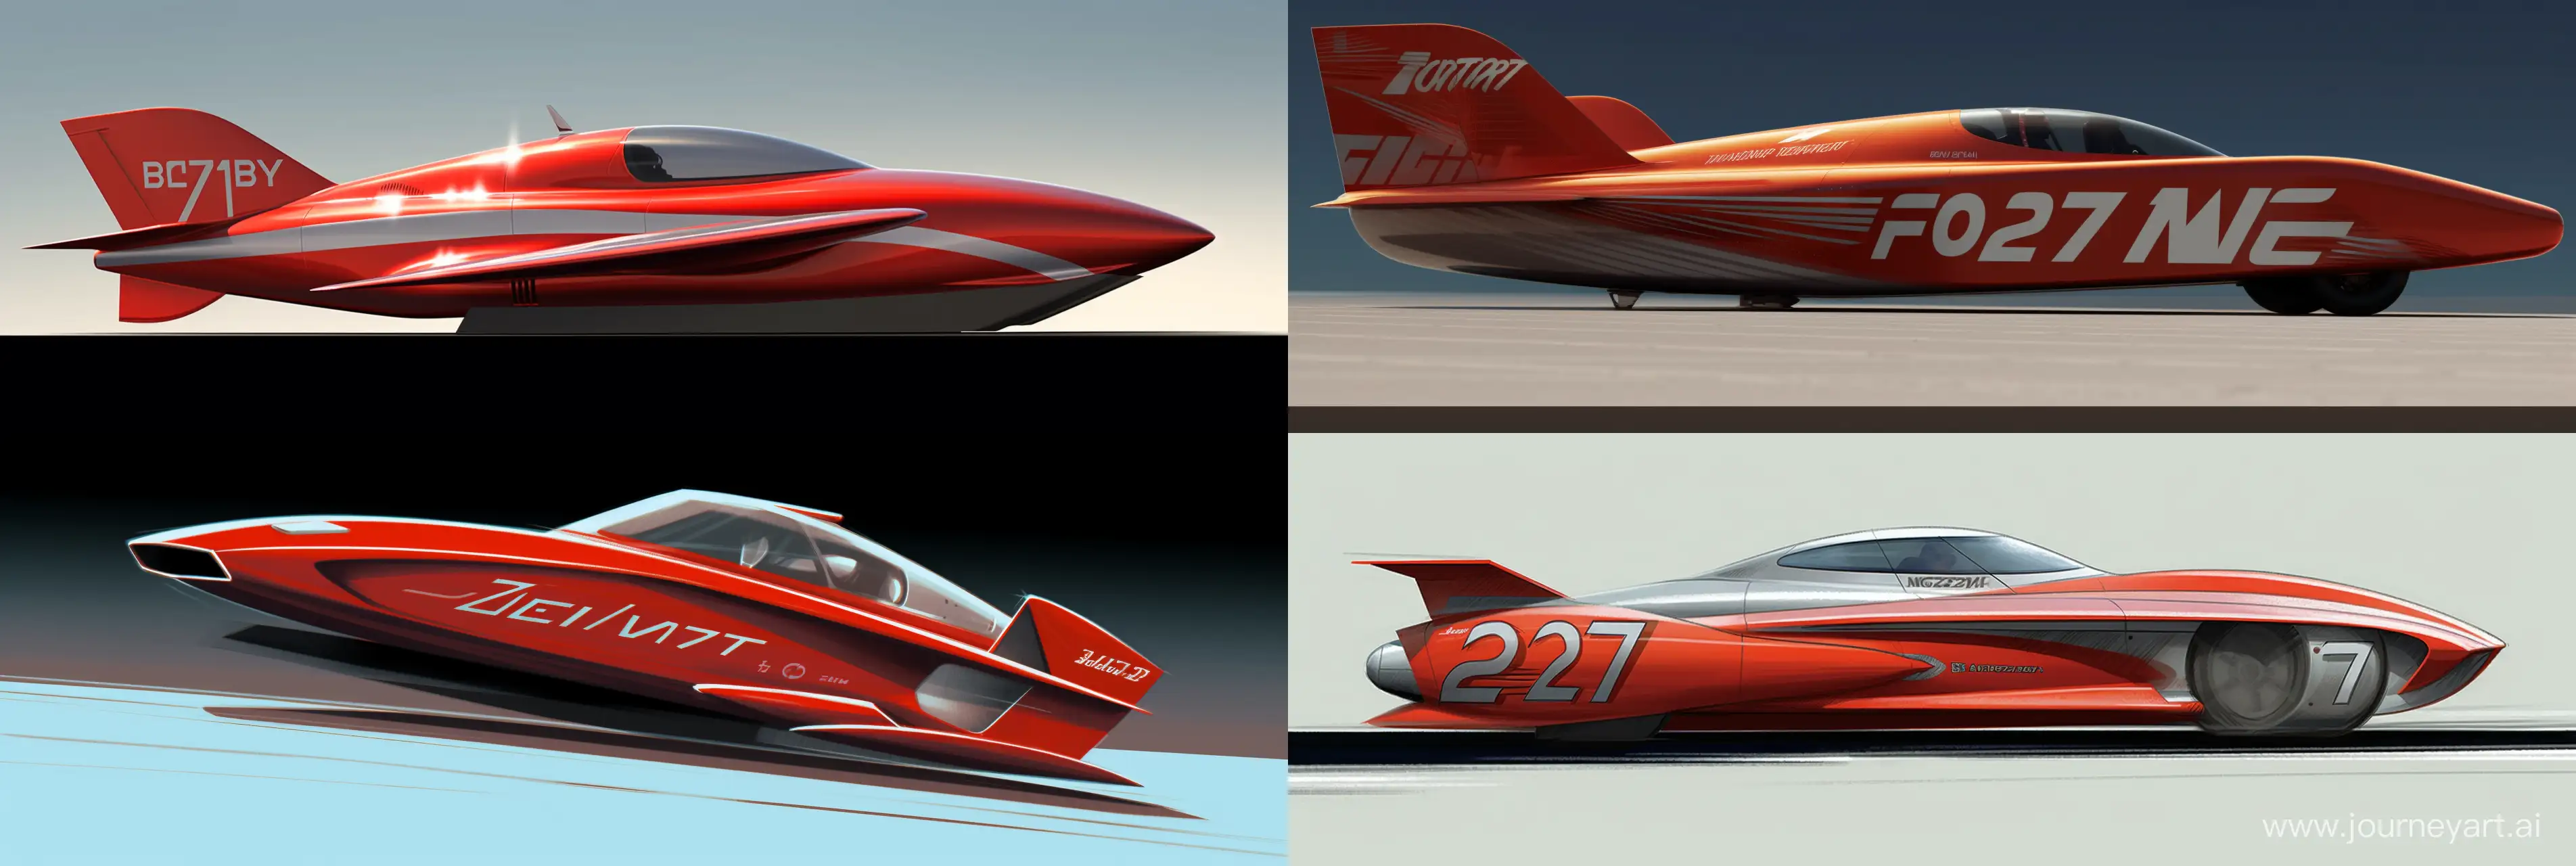 Dynamic-Formula-2-Powerboat-Livery-Design-Speed-and-Sophistication-in-Crimson-and-Silver